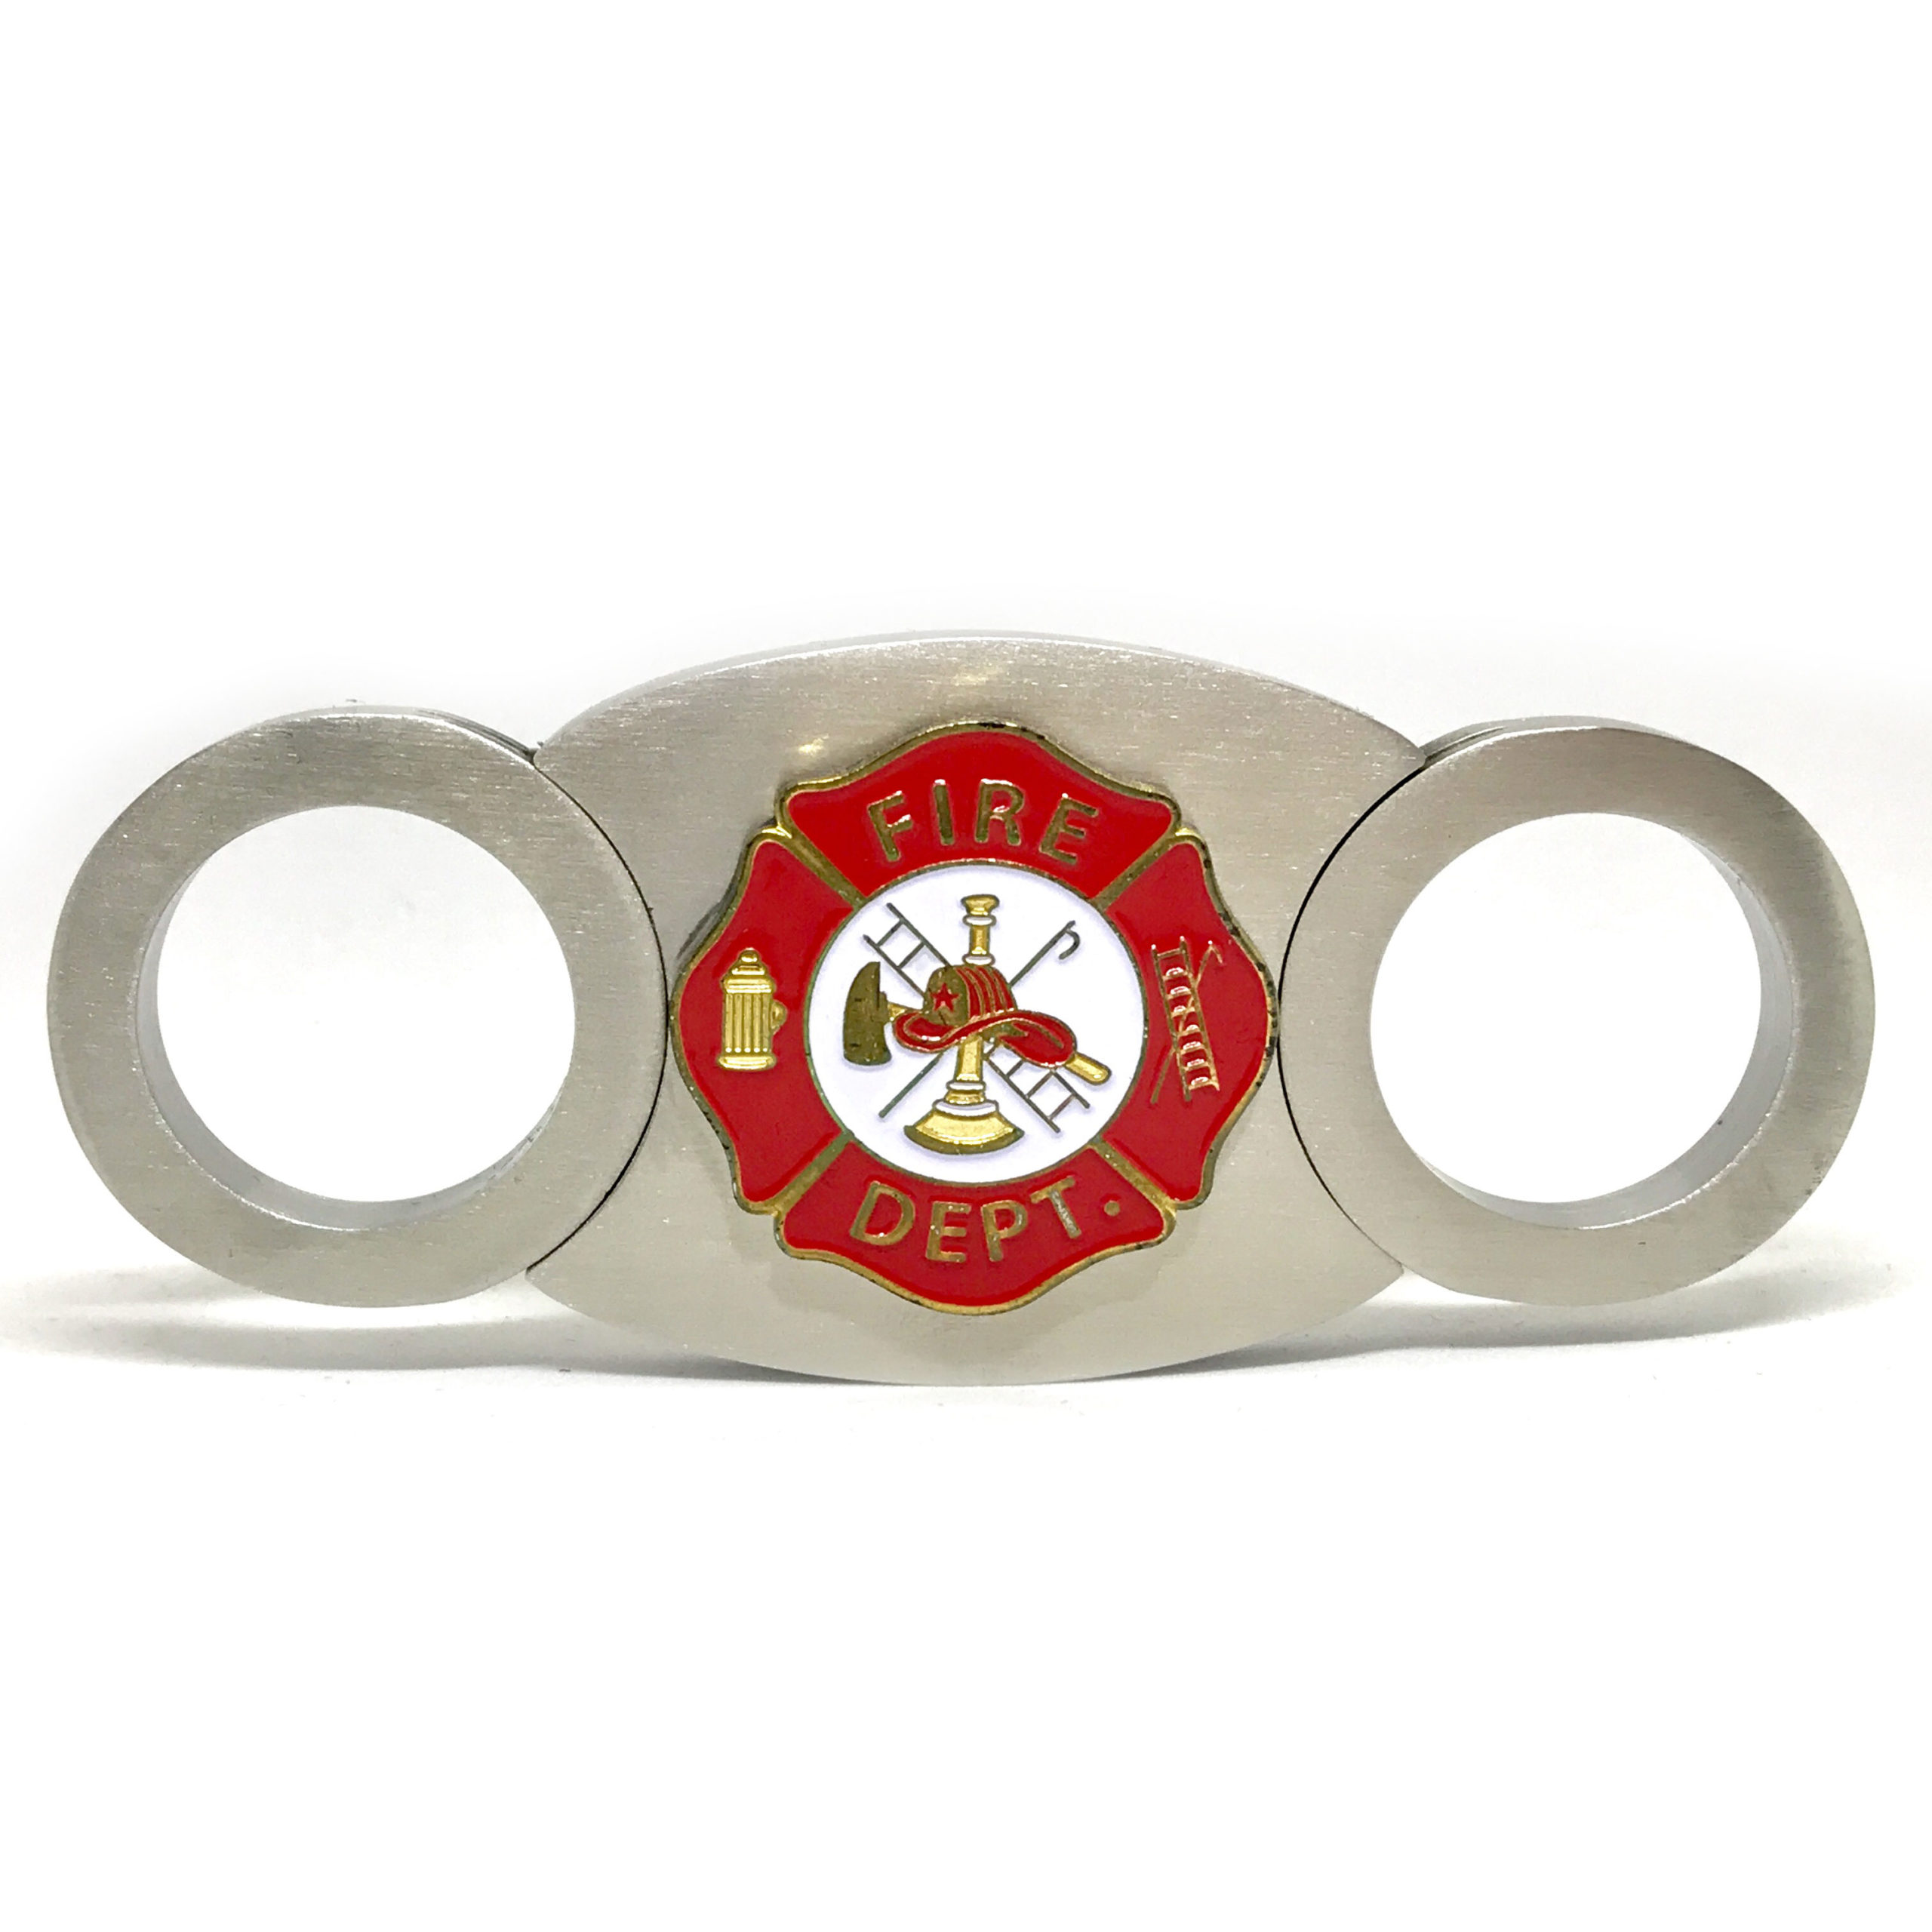 Picture of Cigar Cutters by Jim CT-FMN3 Stainless Steel Closed Guillotine Cutter With Fireman&amp;apos;s Cross  Red Embellishment